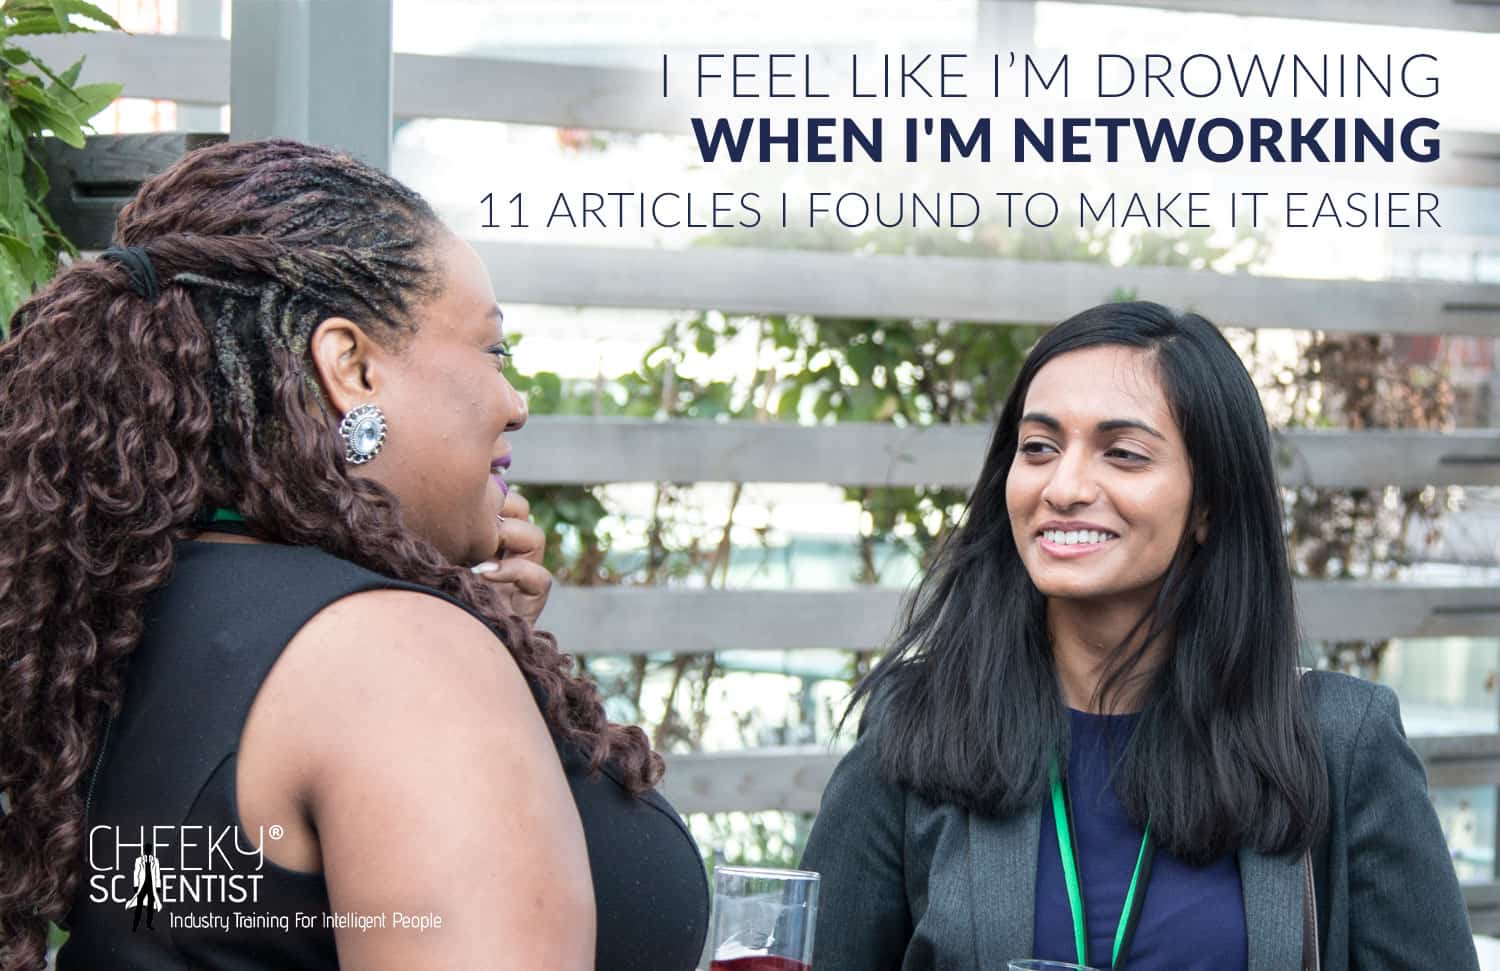 Drowning When Networking As A PhD? This Makes It Easier.